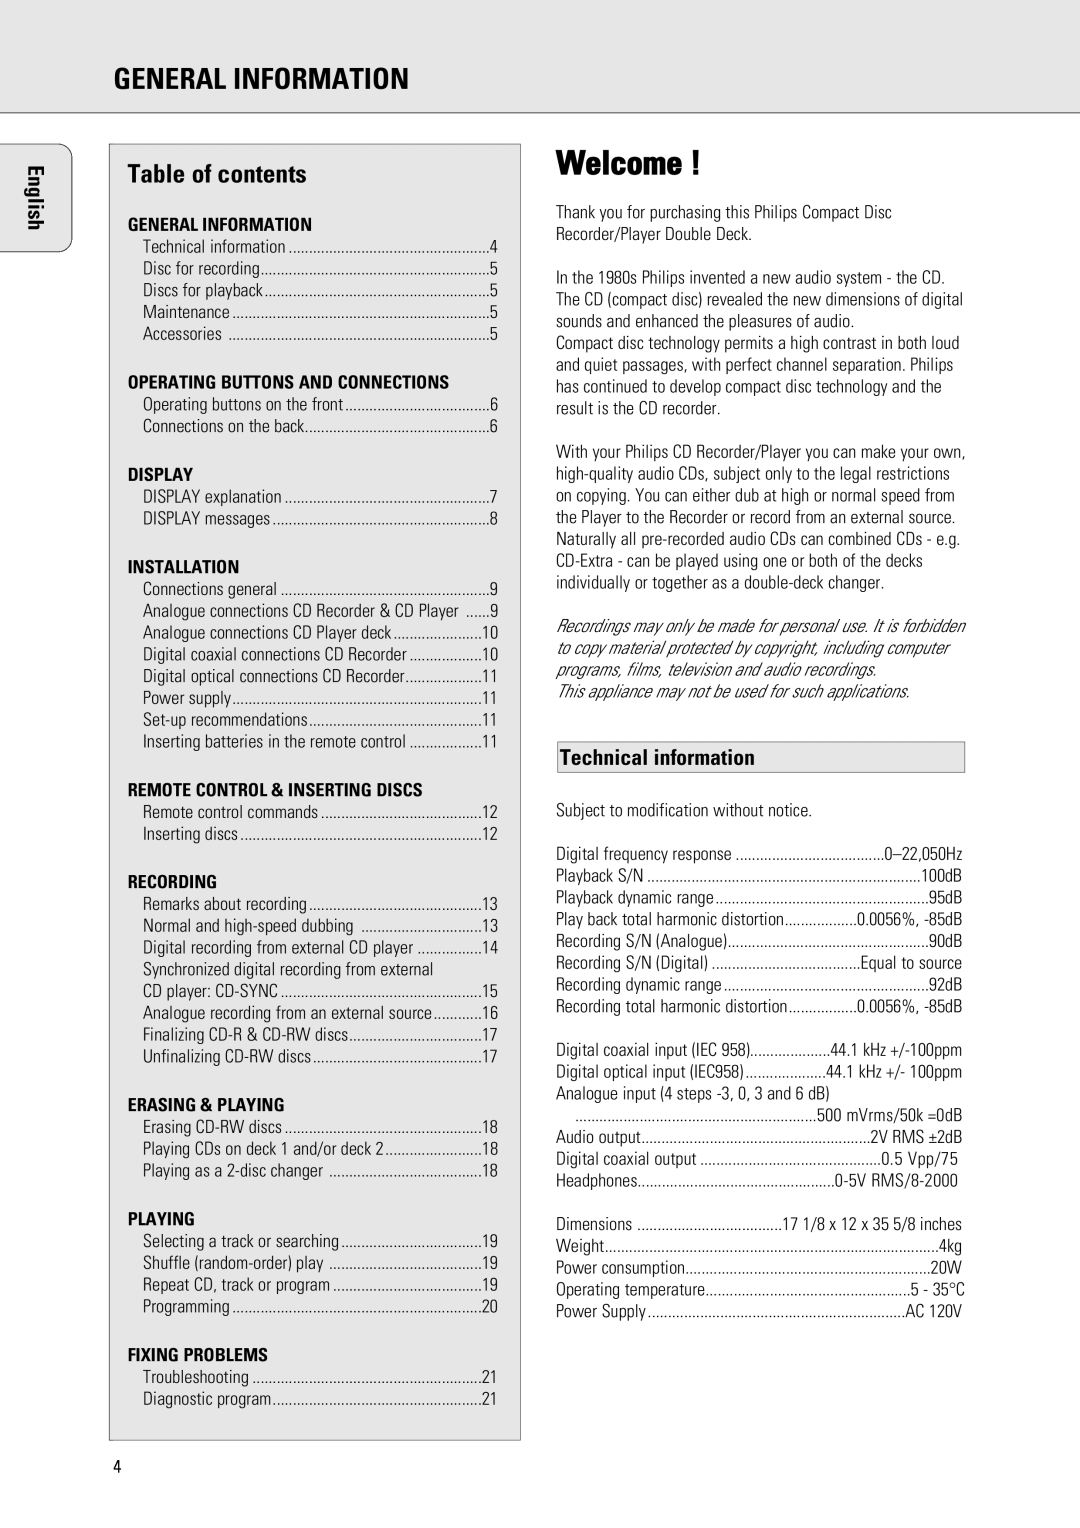 Philips 765 manual Welcome, Table of contents, English, Technical information, General Information, Display, Installation 